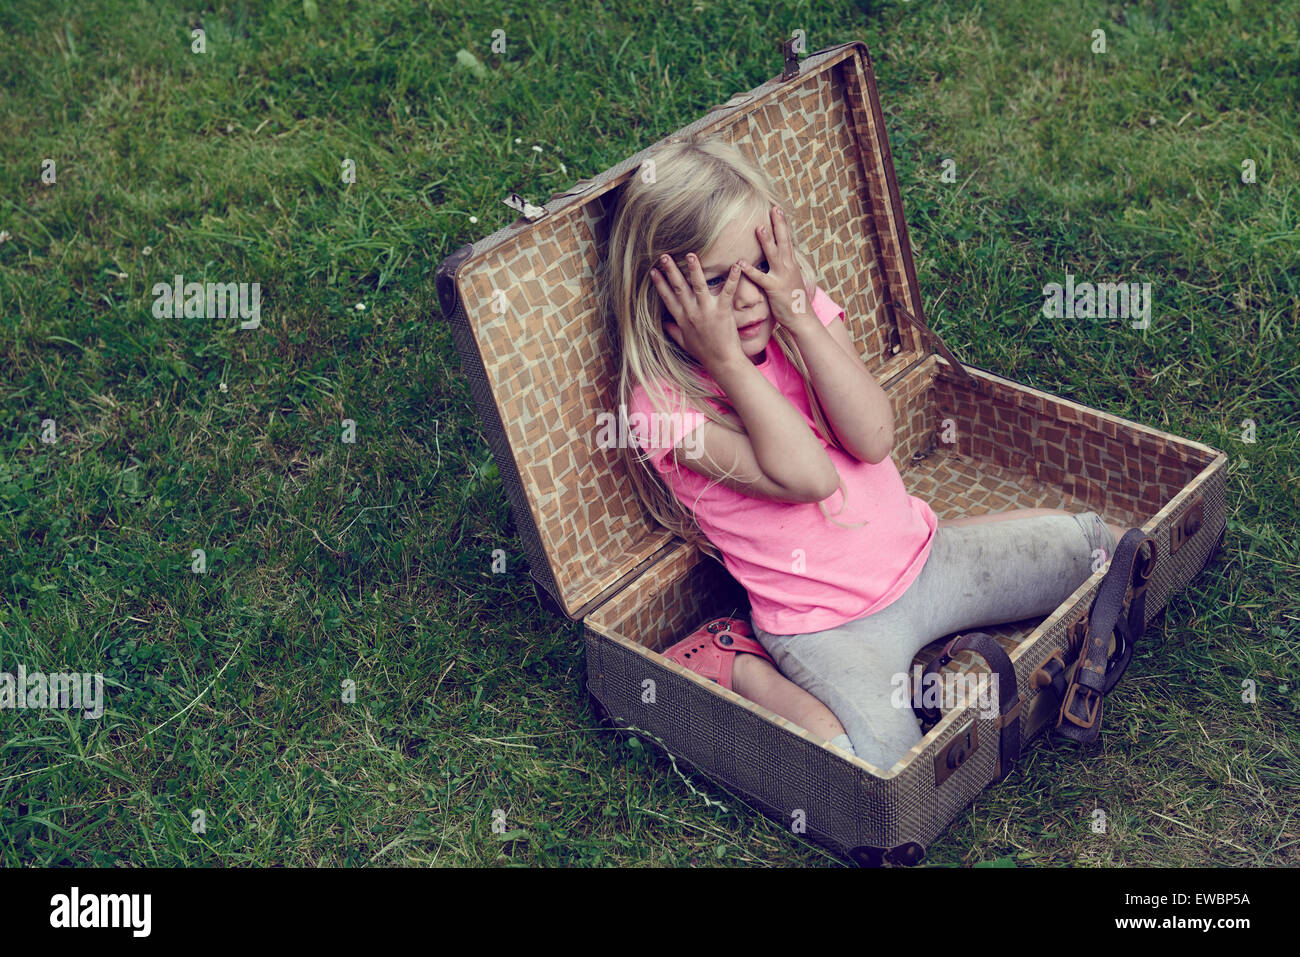 Cute little child blond girl playing inside a vintage old suitcase outside Stock Photo